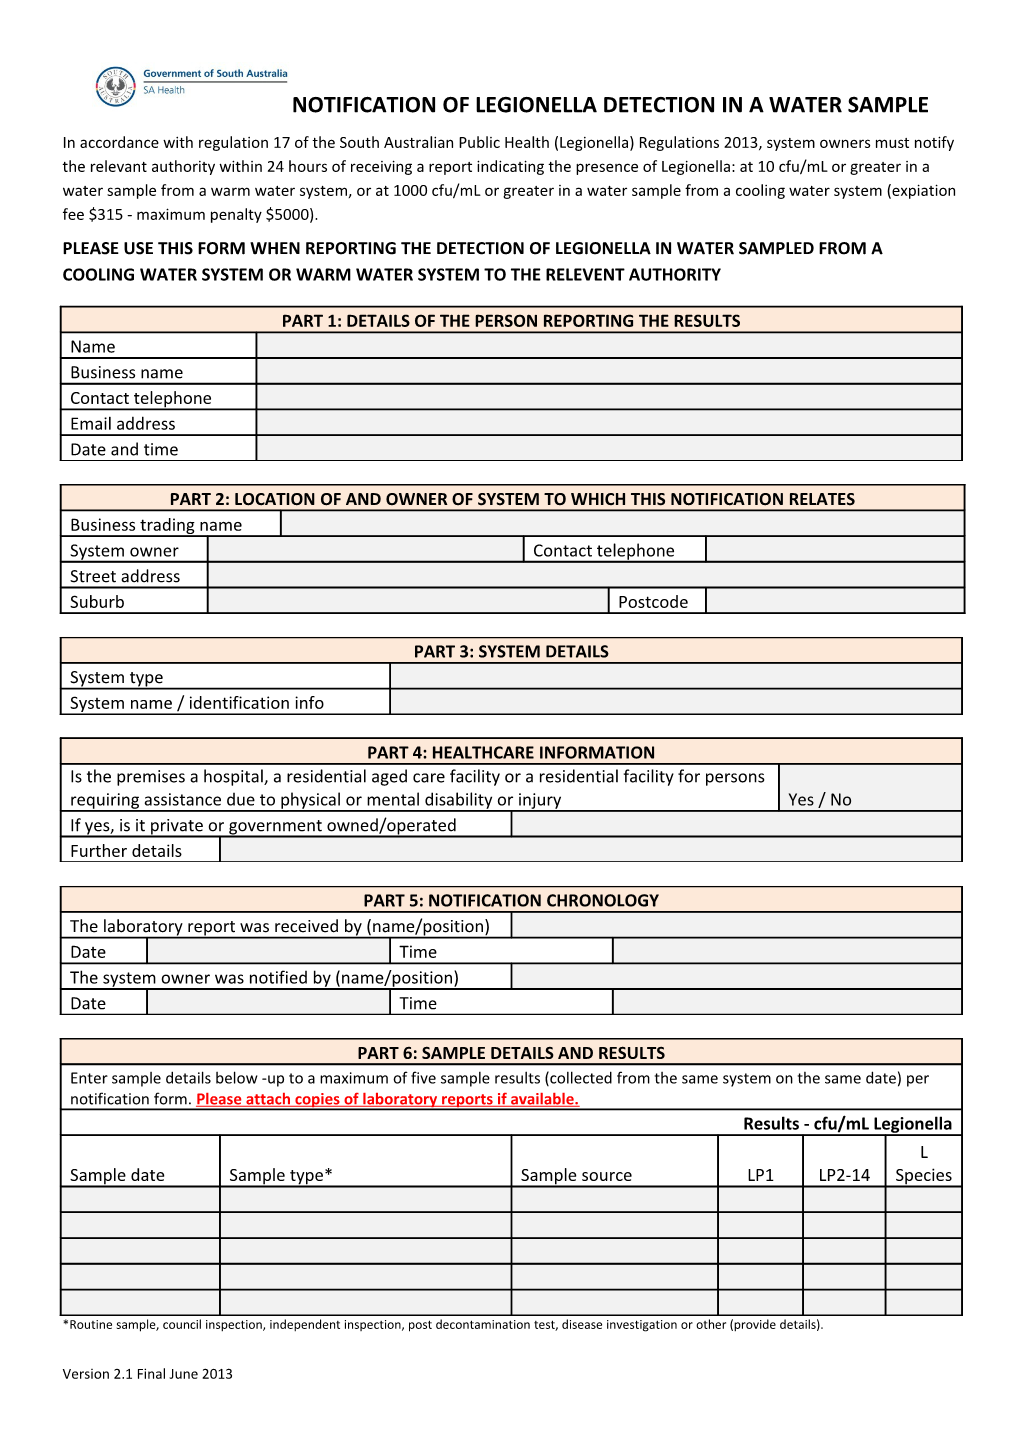 Please Use This Form When Reporting the Detection of Legionella in Water Sampled From